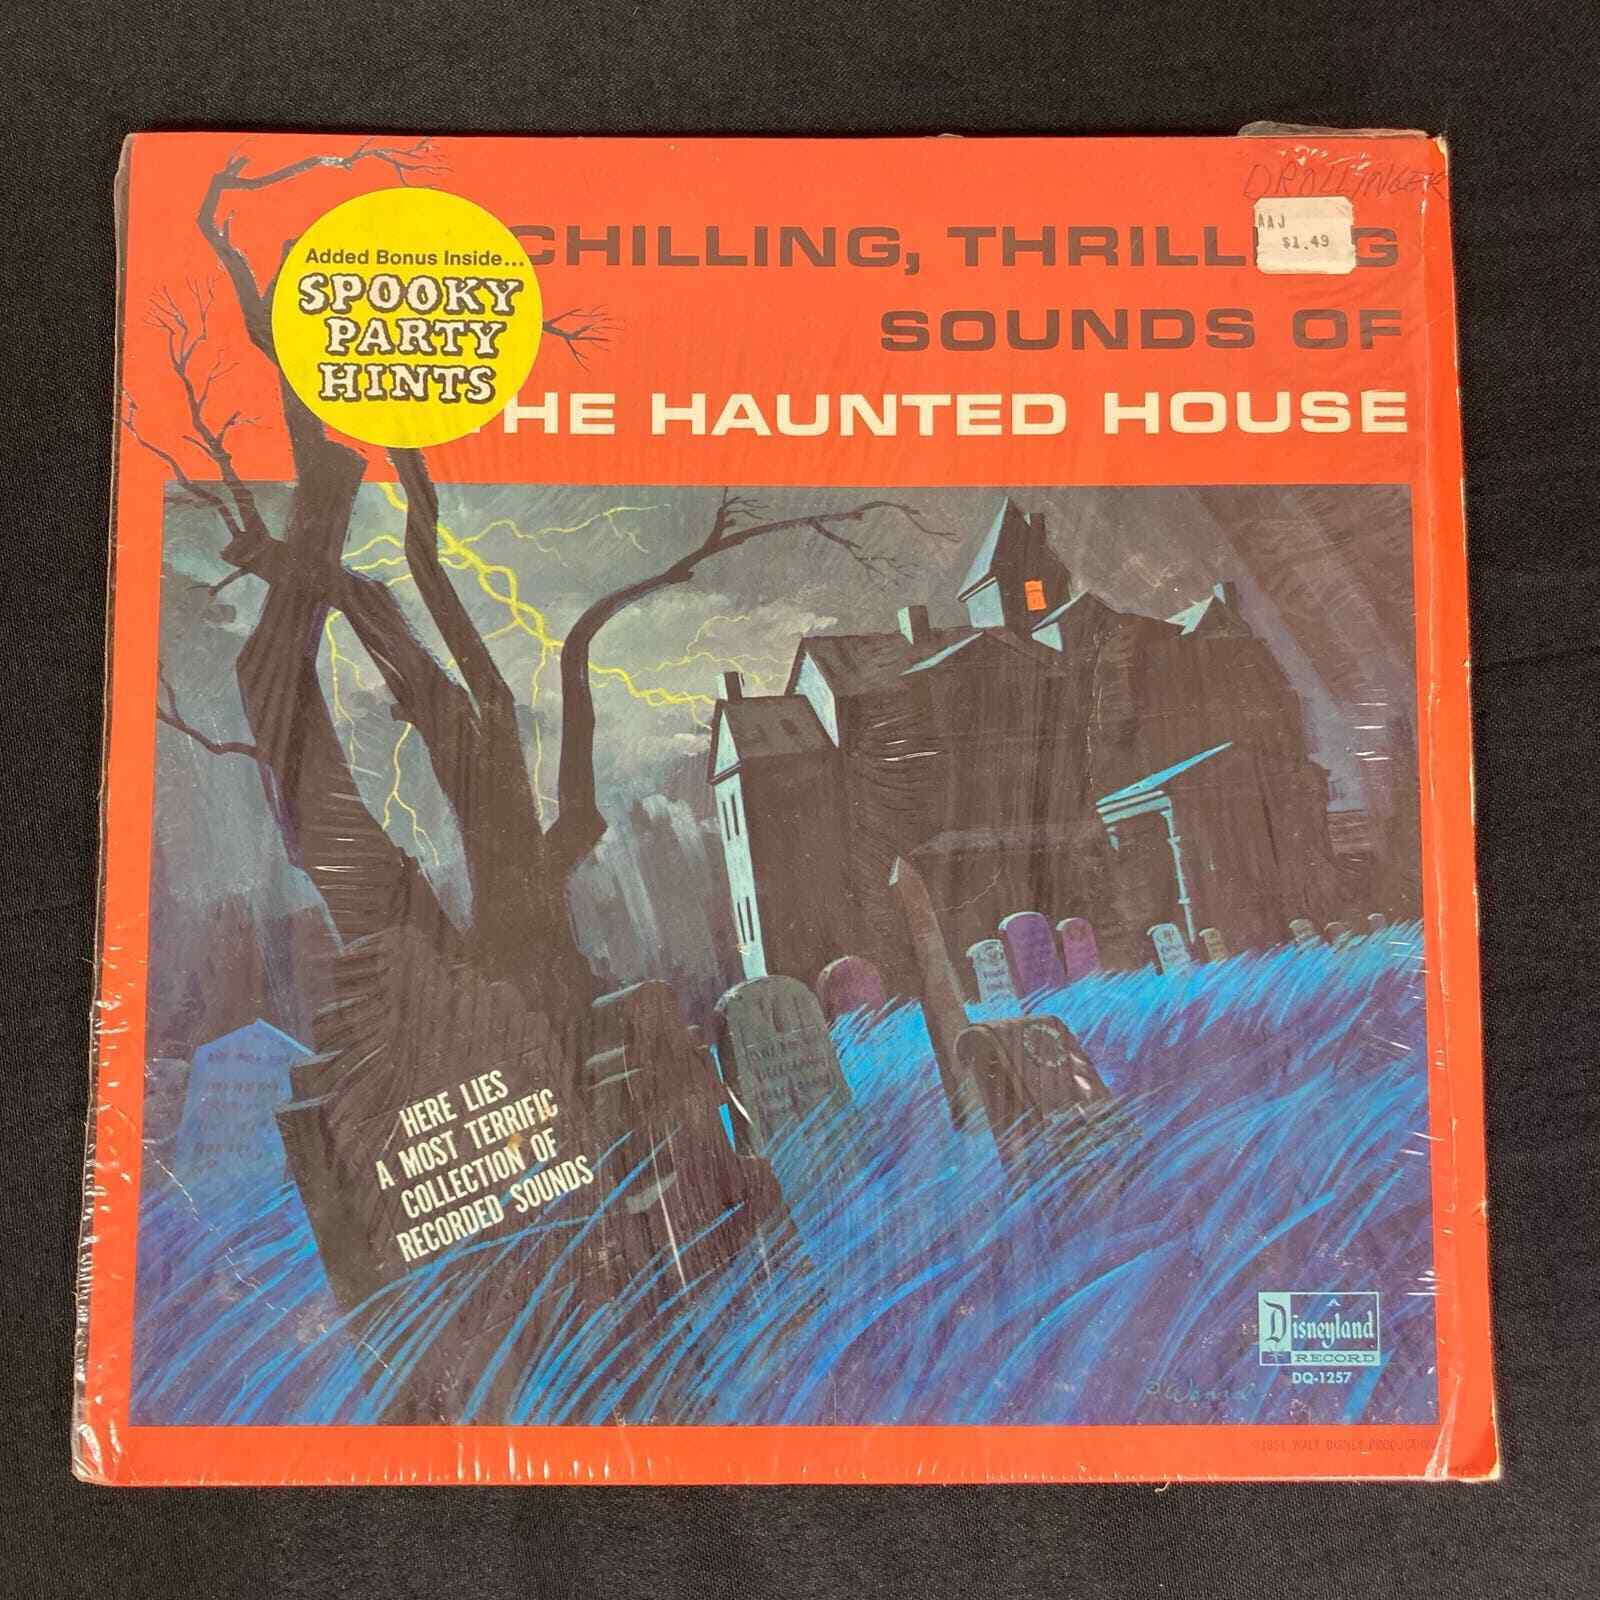 1964 Disneyland Vintage Vinyl Record Chilling Thrilling Sounds Haunted House